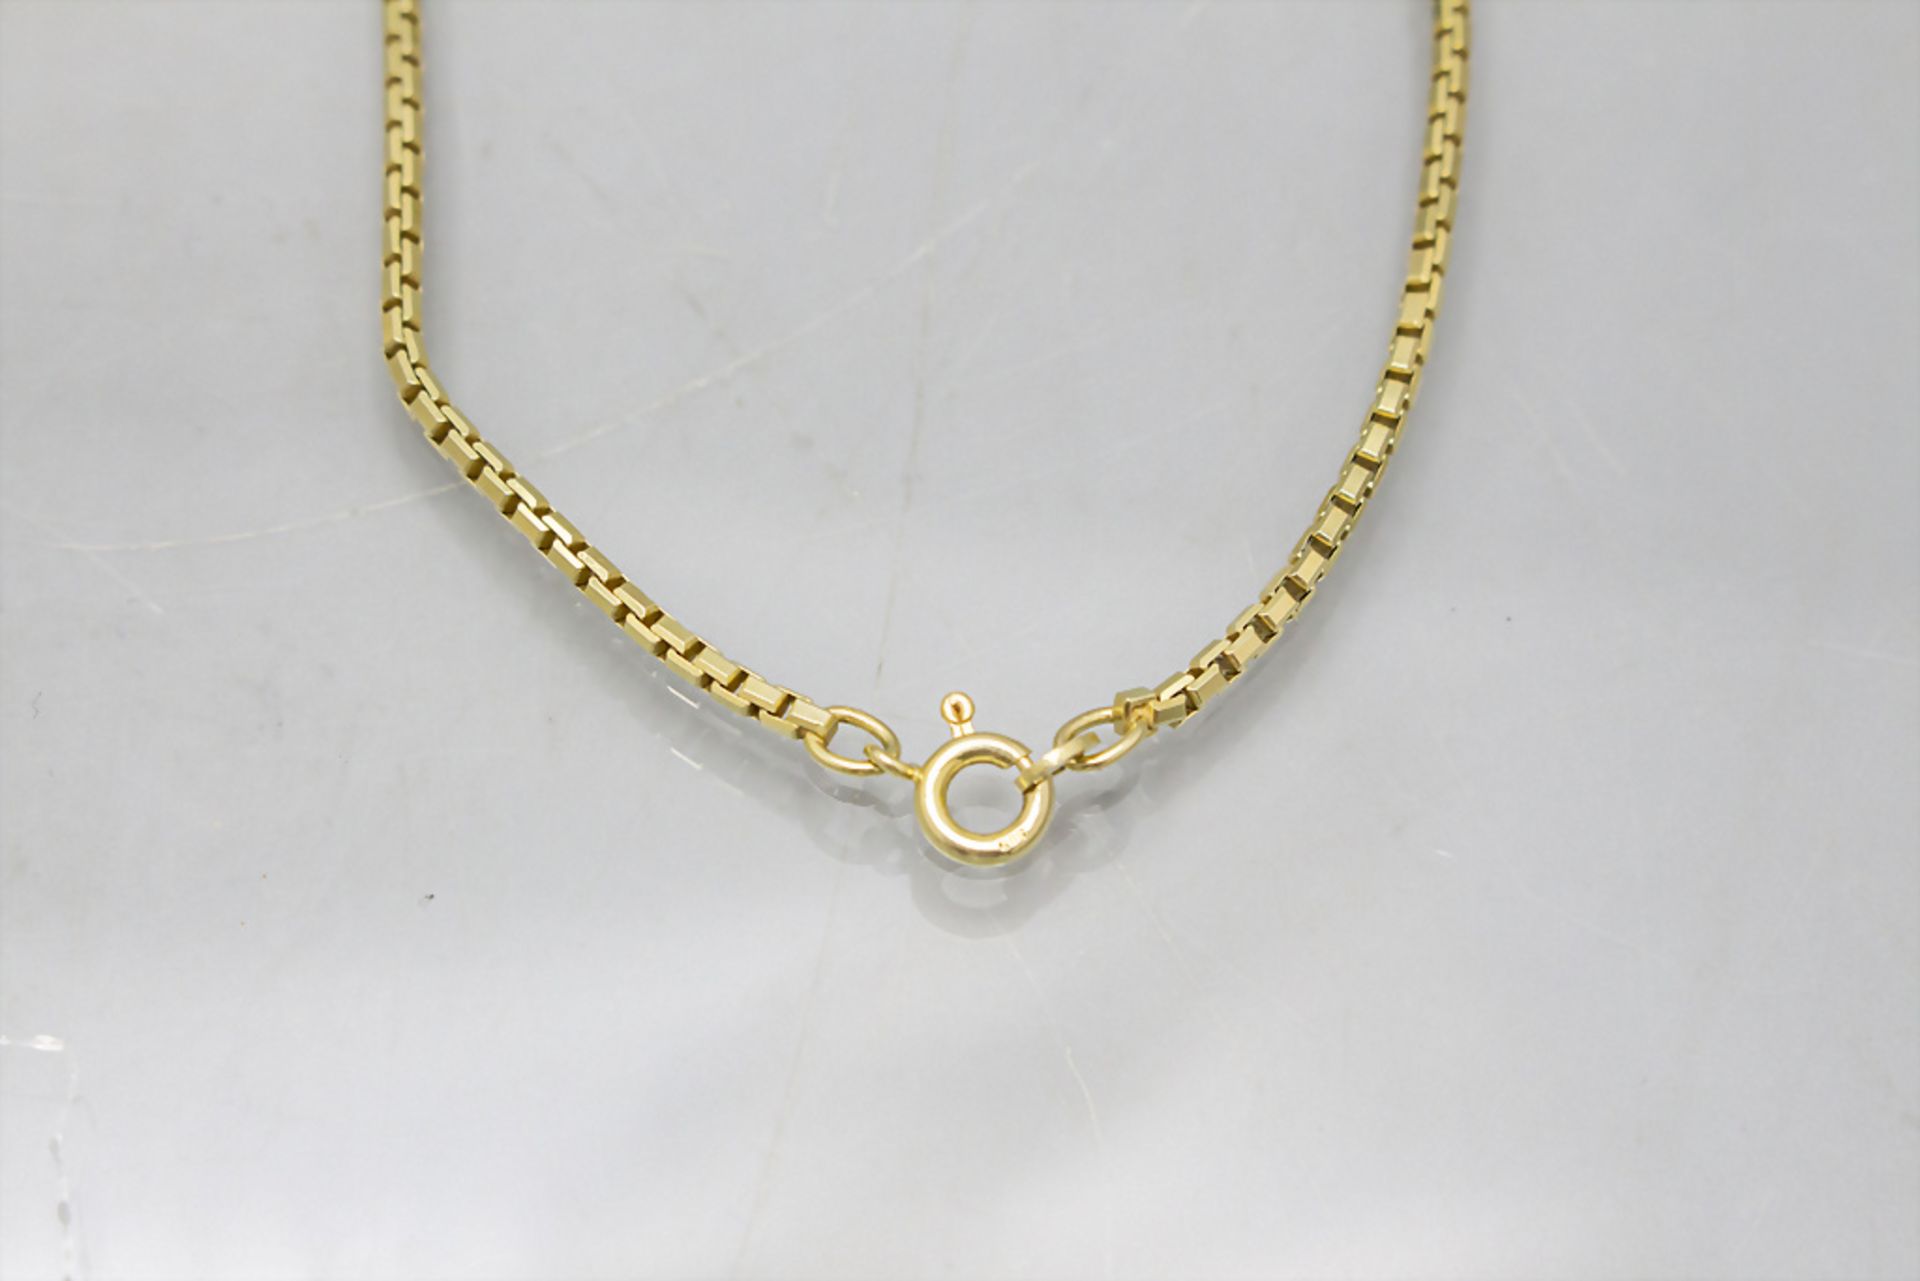 Goldkette / An 14 ct gold necklace - Image 2 of 2